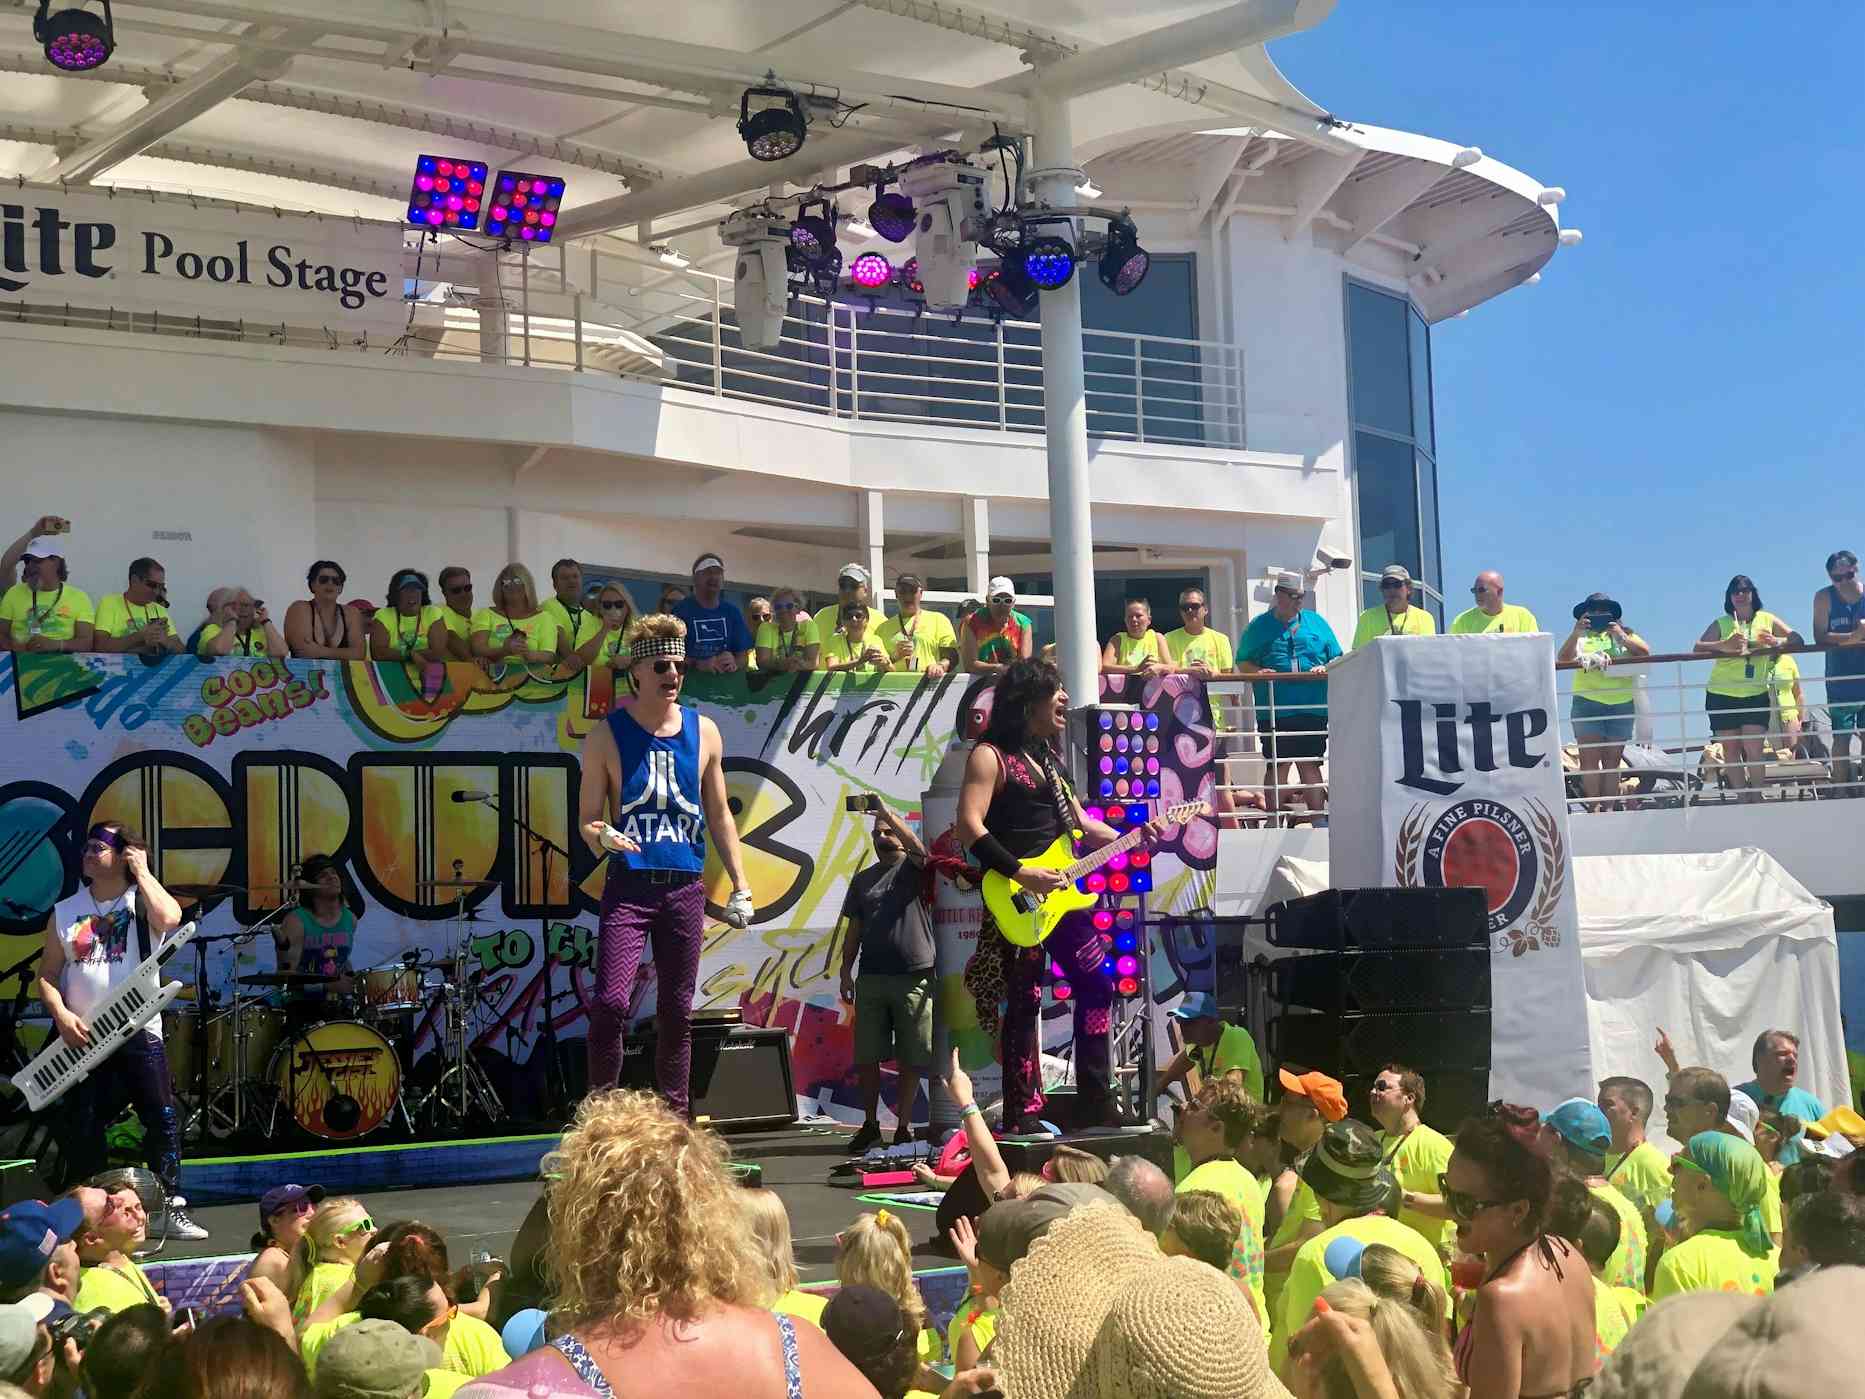 The Greatest 80s Party Ever, Cruise Entertainment